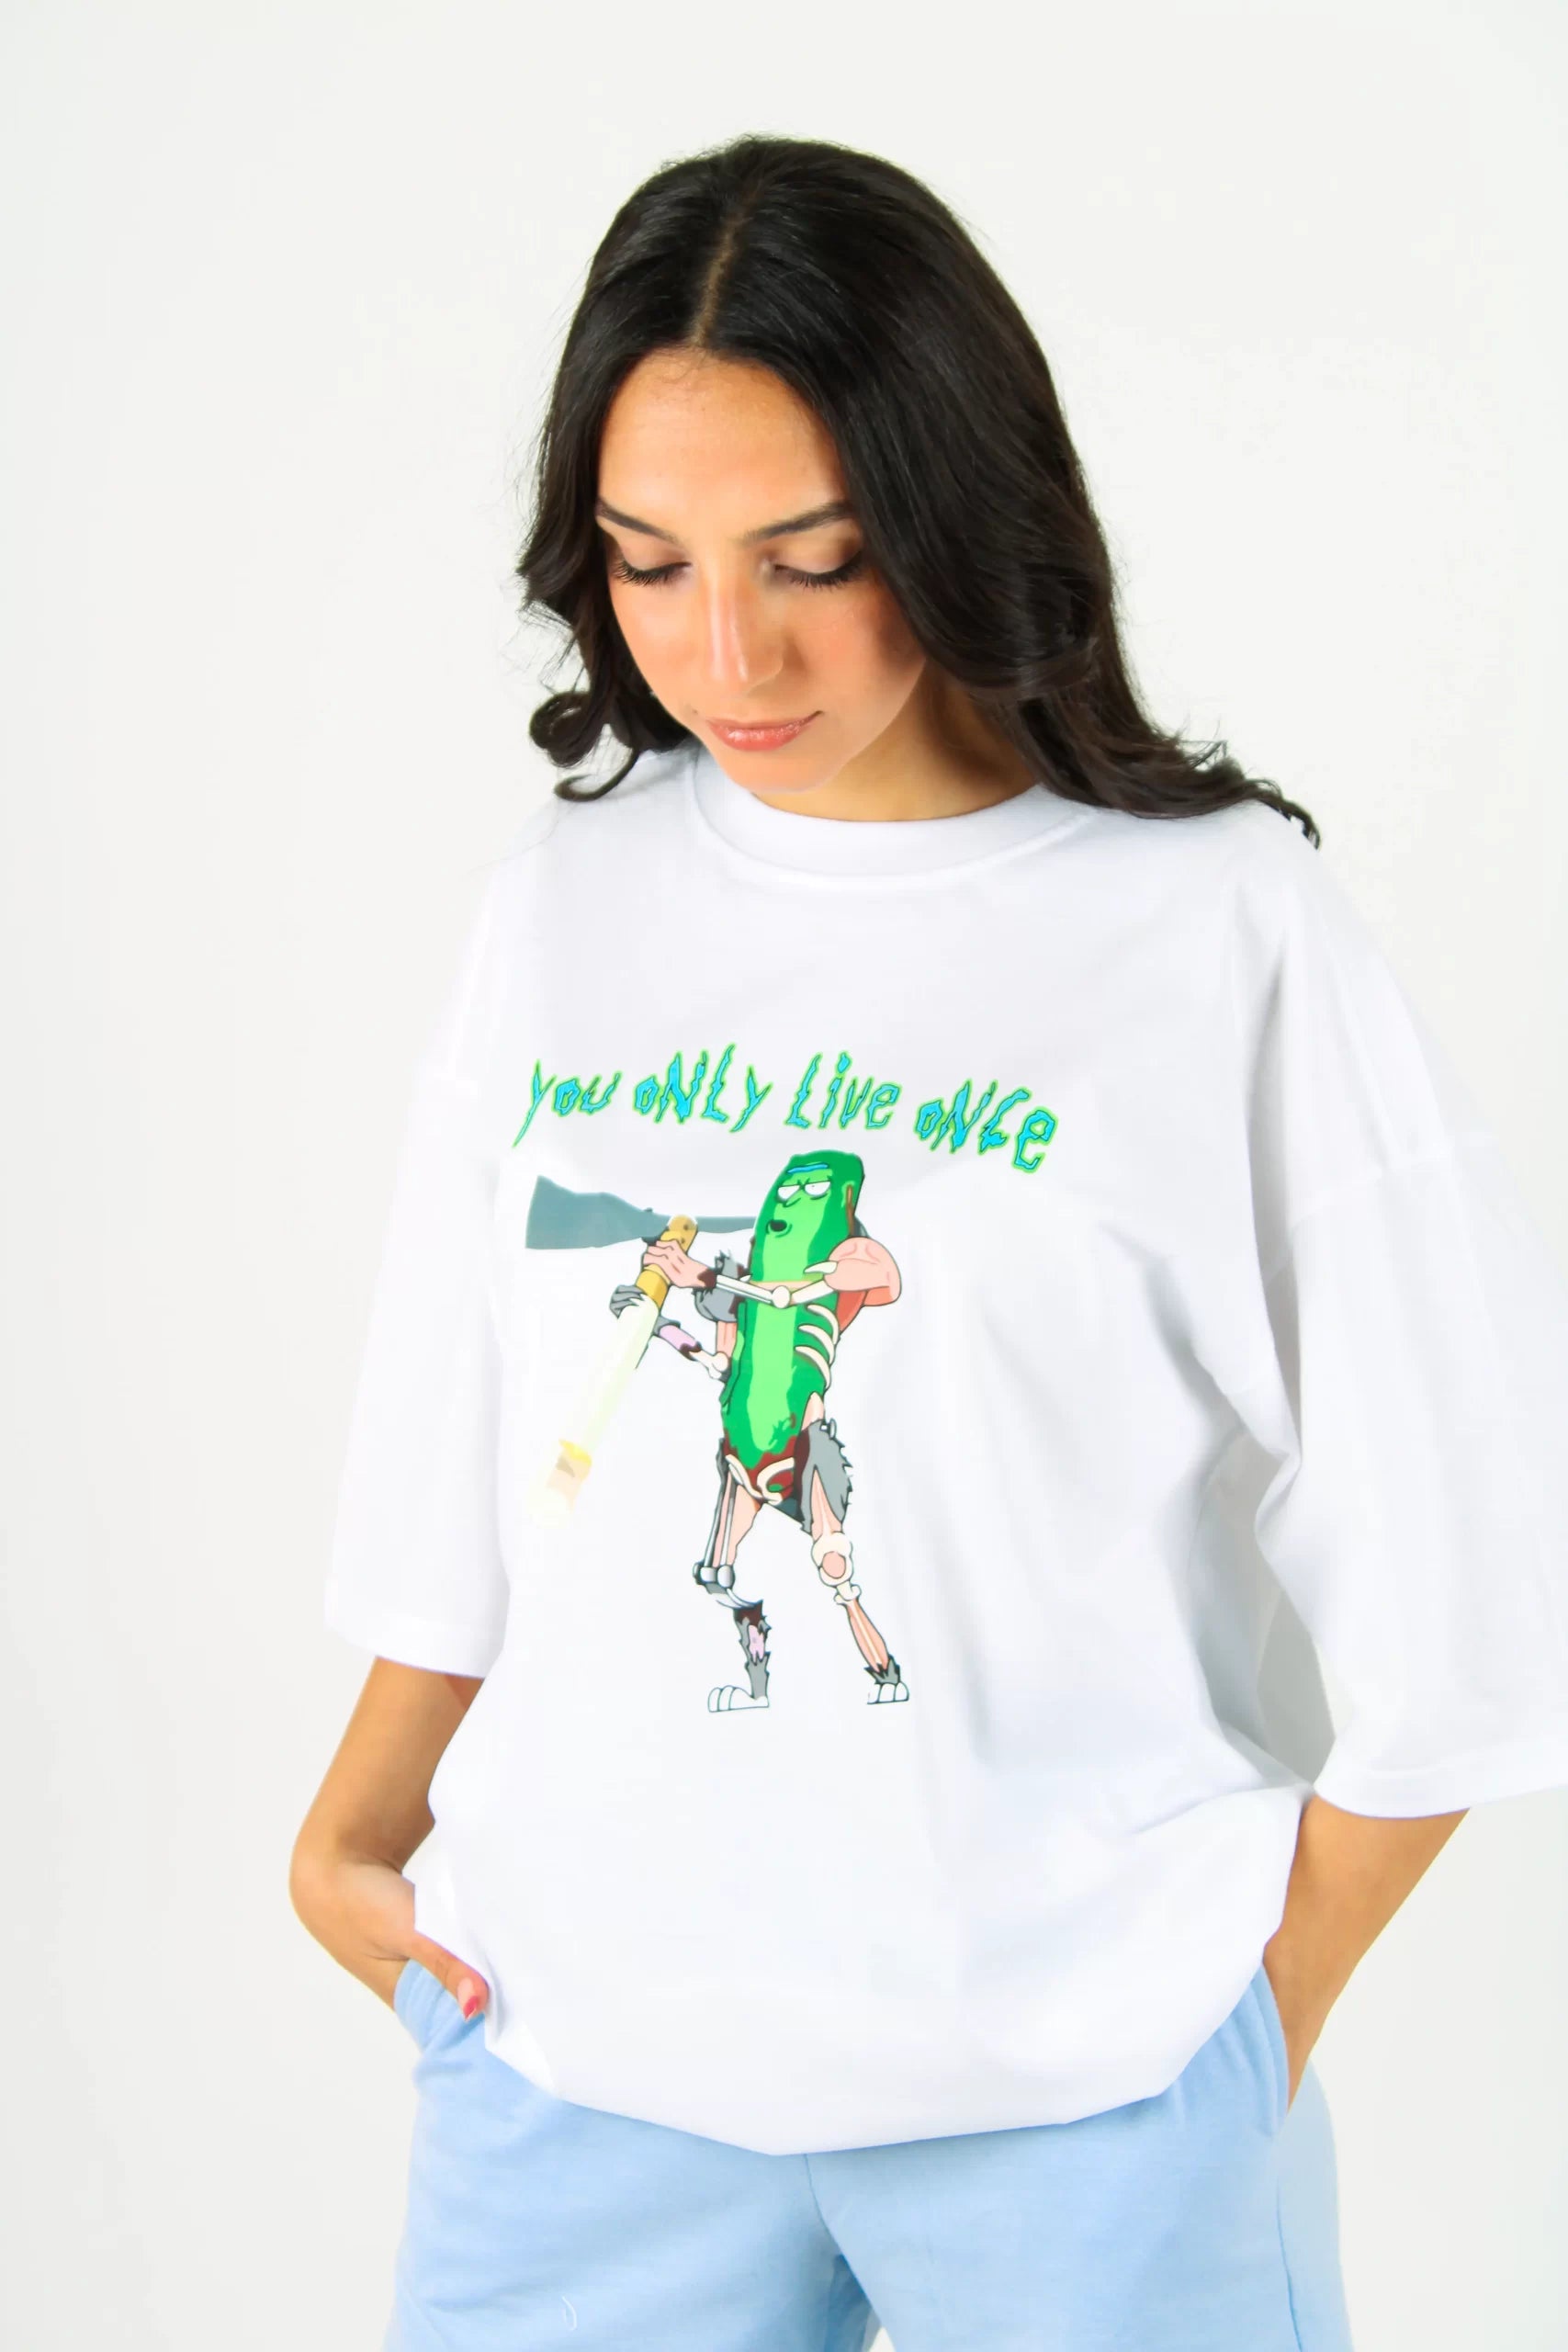 You only live once Tee